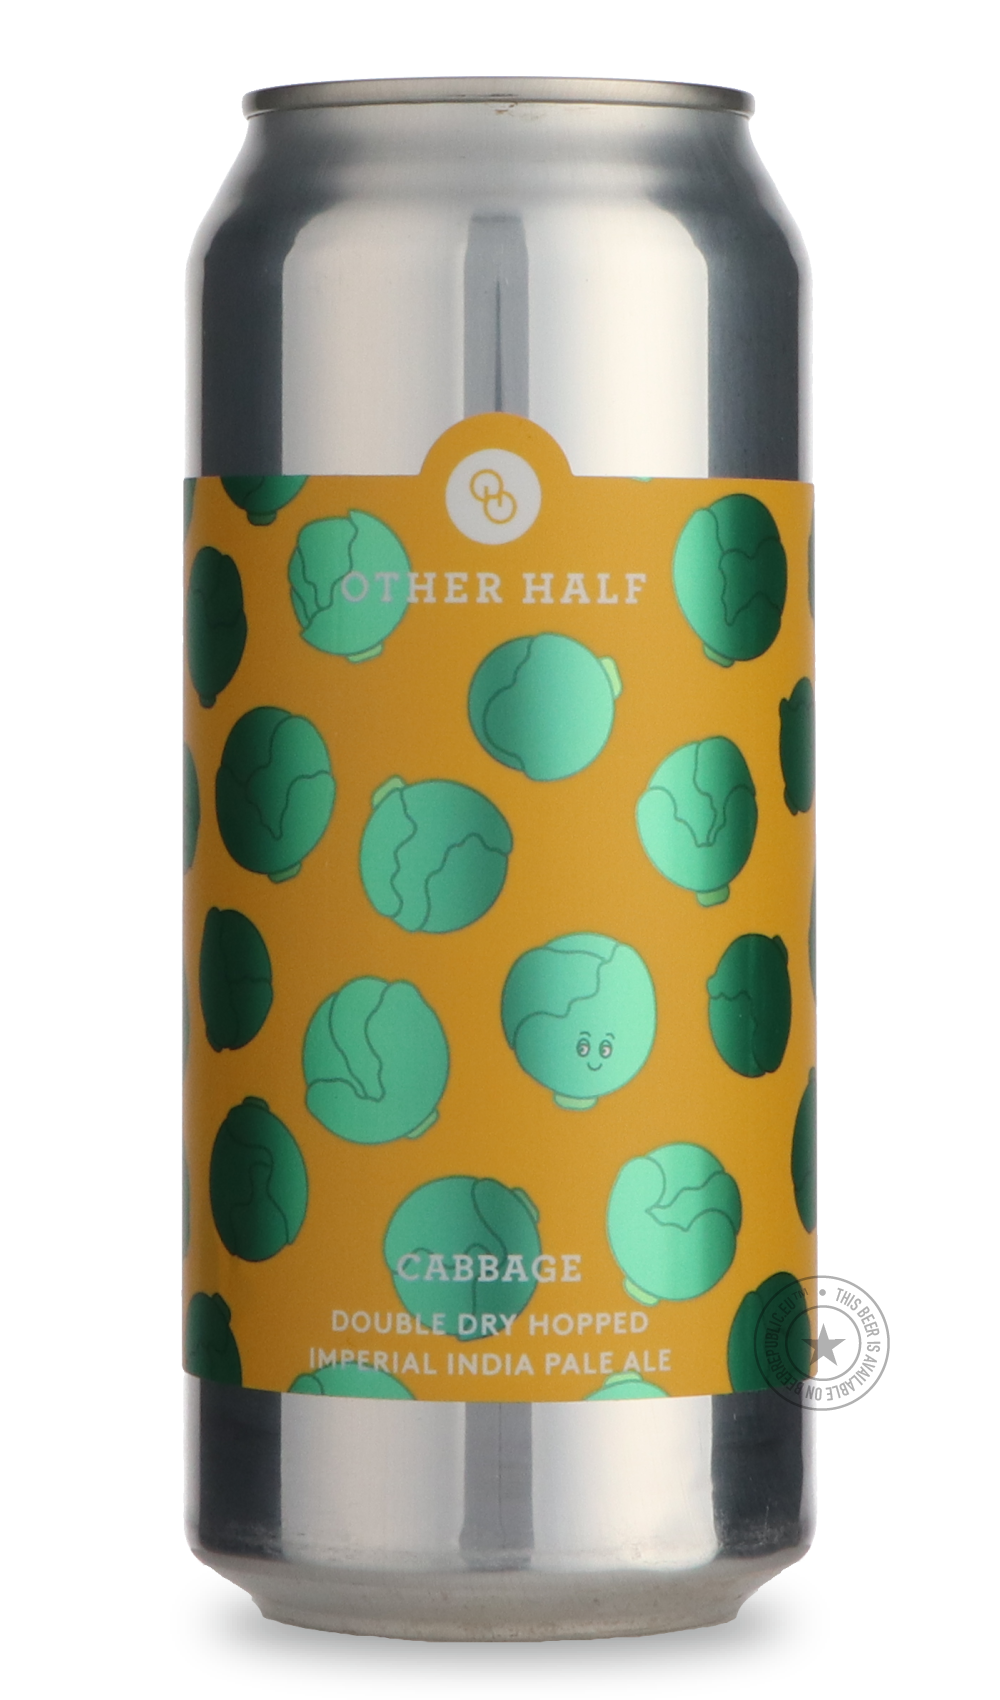 -Other Half- DDH Cabbage-IPA- Only @ Beer Republic - The best online beer store for American & Canadian craft beer - Buy beer online from the USA and Canada - Bier online kopen - Amerikaans bier kopen - Craft beer store - Craft beer kopen - Amerikanisch bier kaufen - Bier online kaufen - Acheter biere online - IPA - Stout - Porter - New England IPA - Hazy IPA - Imperial Stout - Barrel Aged - Barrel Aged Imperial Stout - Brown - Dark beer - Blond - Blonde - Pilsner - Lager - Wheat - Weizen - Amber - Barley W